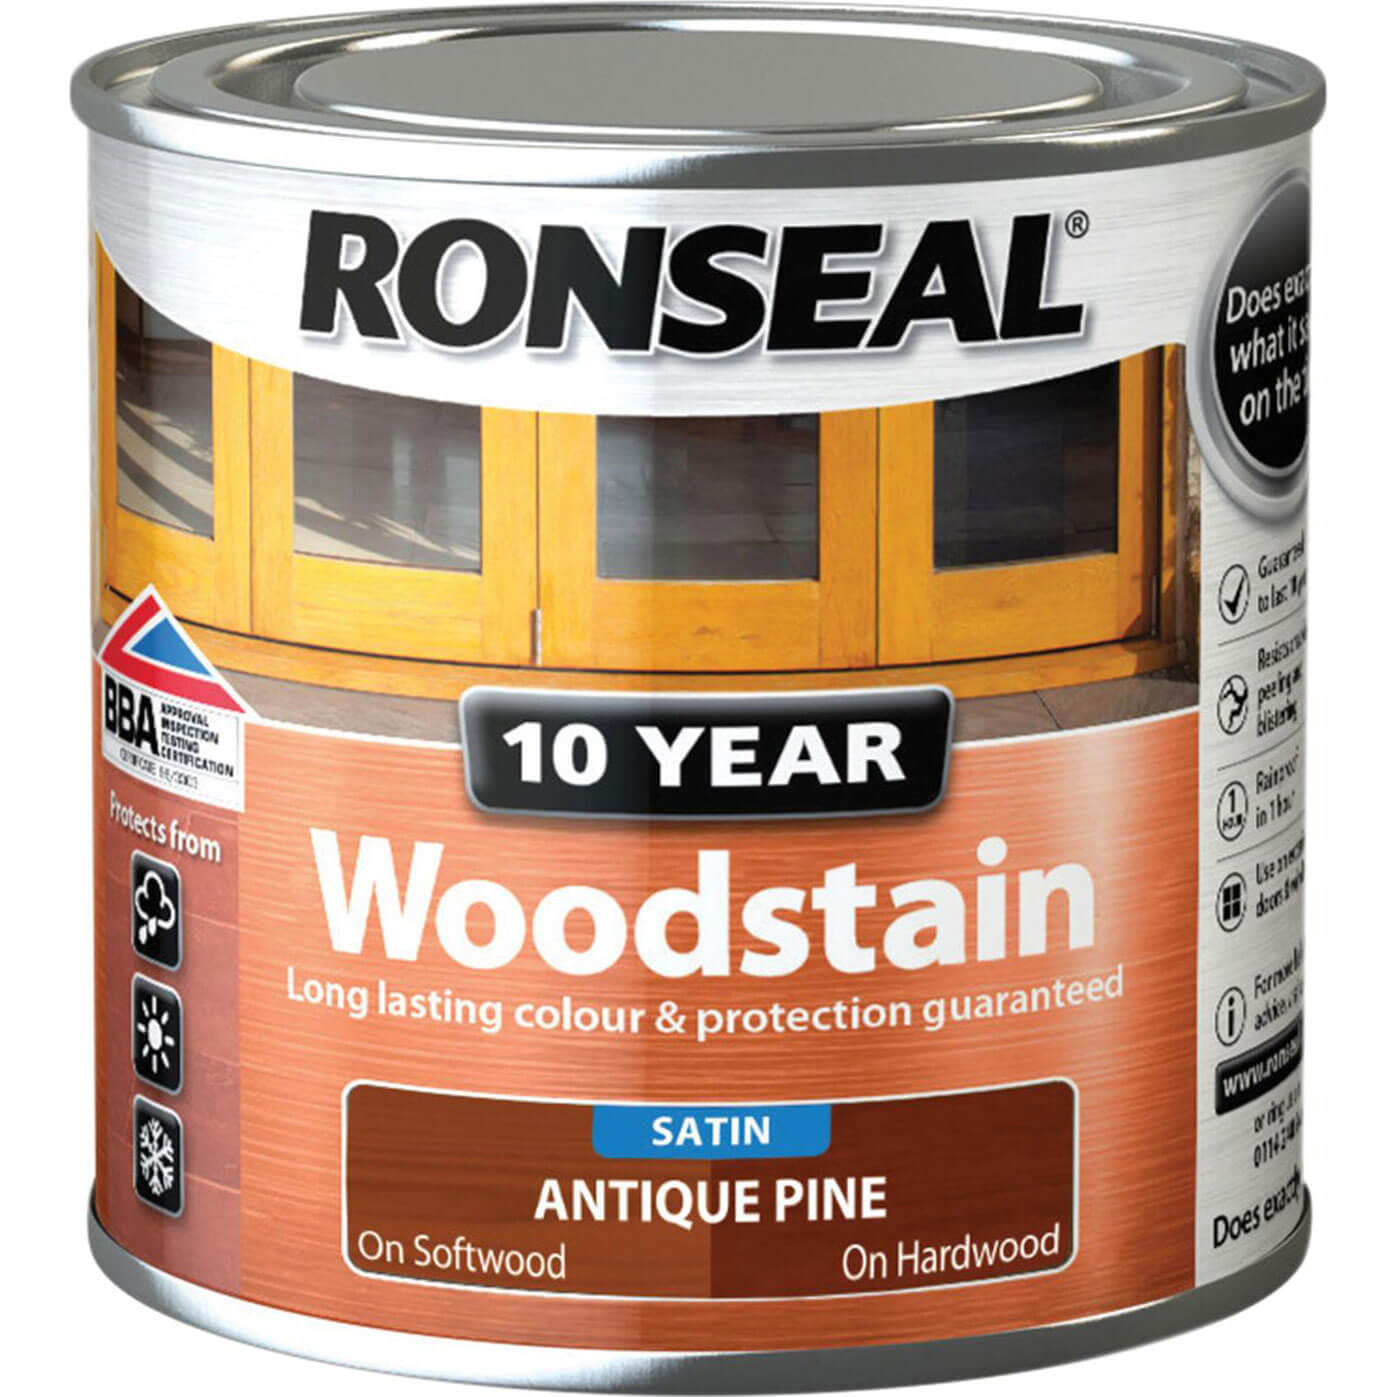 Image of Ronseal 10 Year Wood Stain Antique Pine 250ml